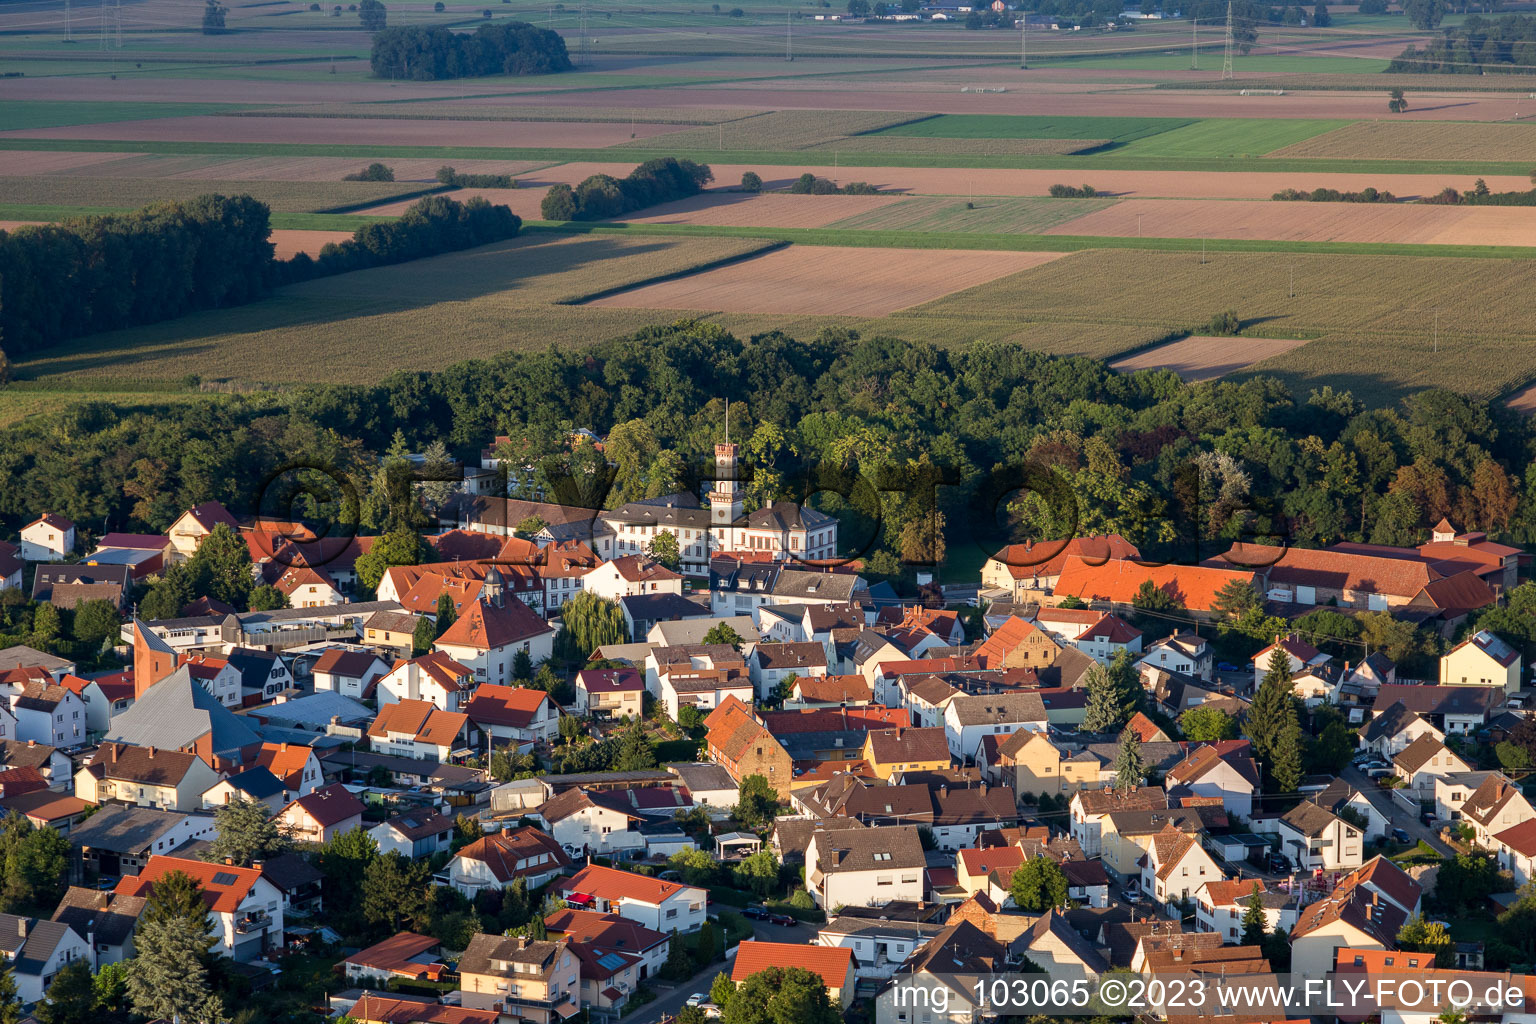 Hüttenfeld in the state Hesse, Germany viewn from the air